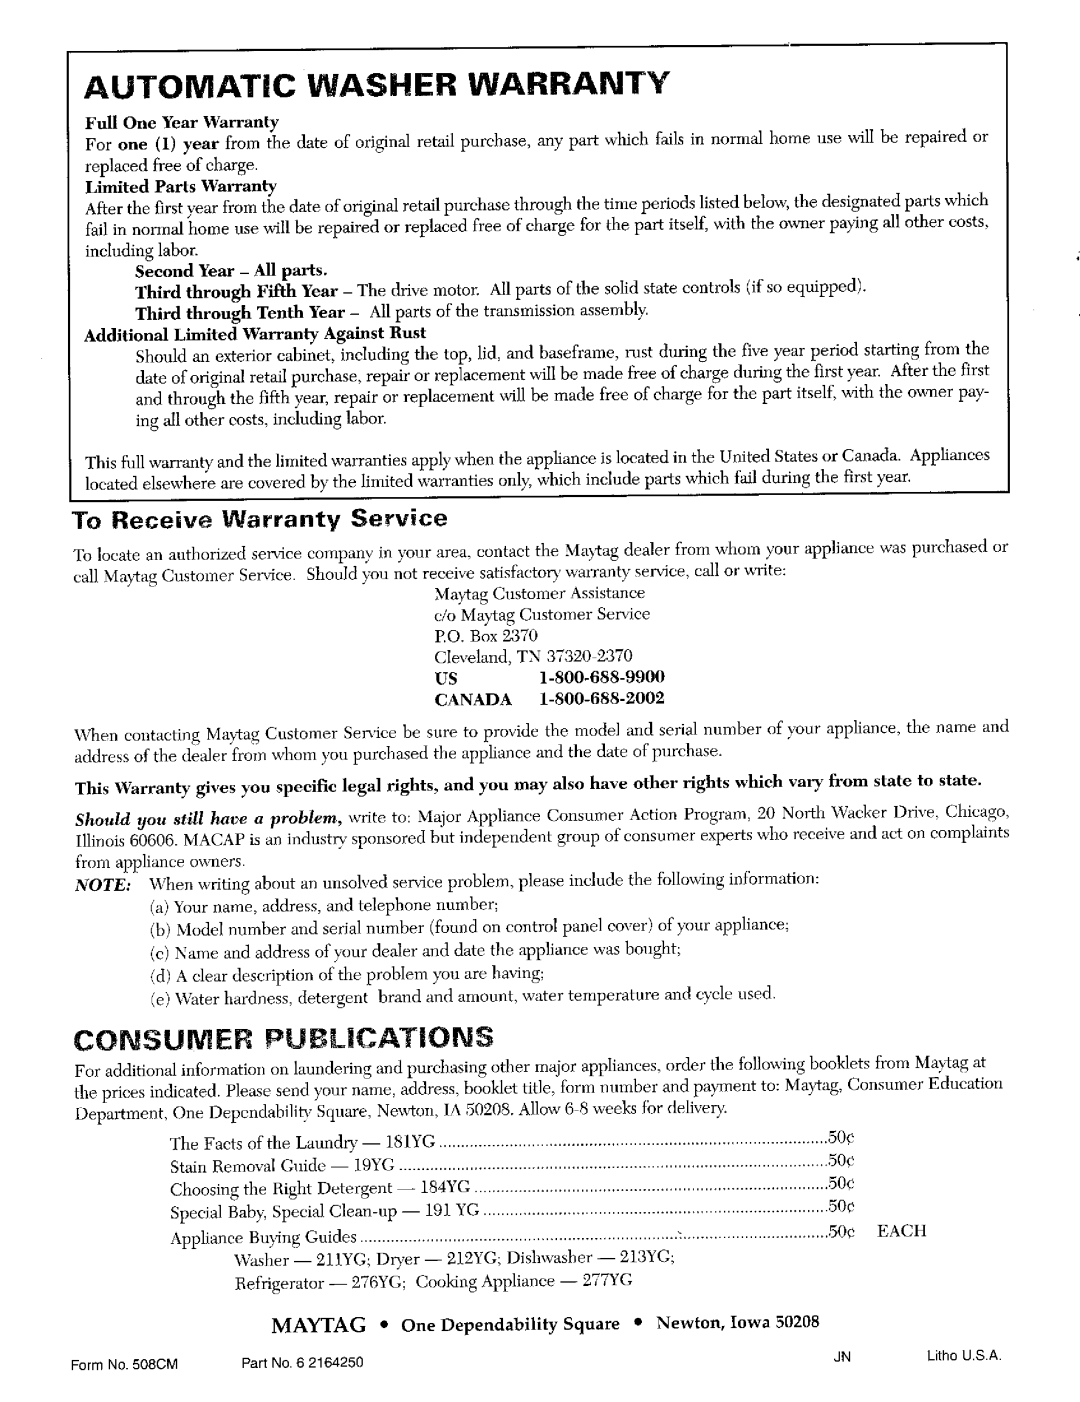 Maytag LAT6914, LAT9824, LAT8904 Automatic Washer Warranty, Consumer Publications, To Receive Warranty Service, 50 ¢, Ea Ch 